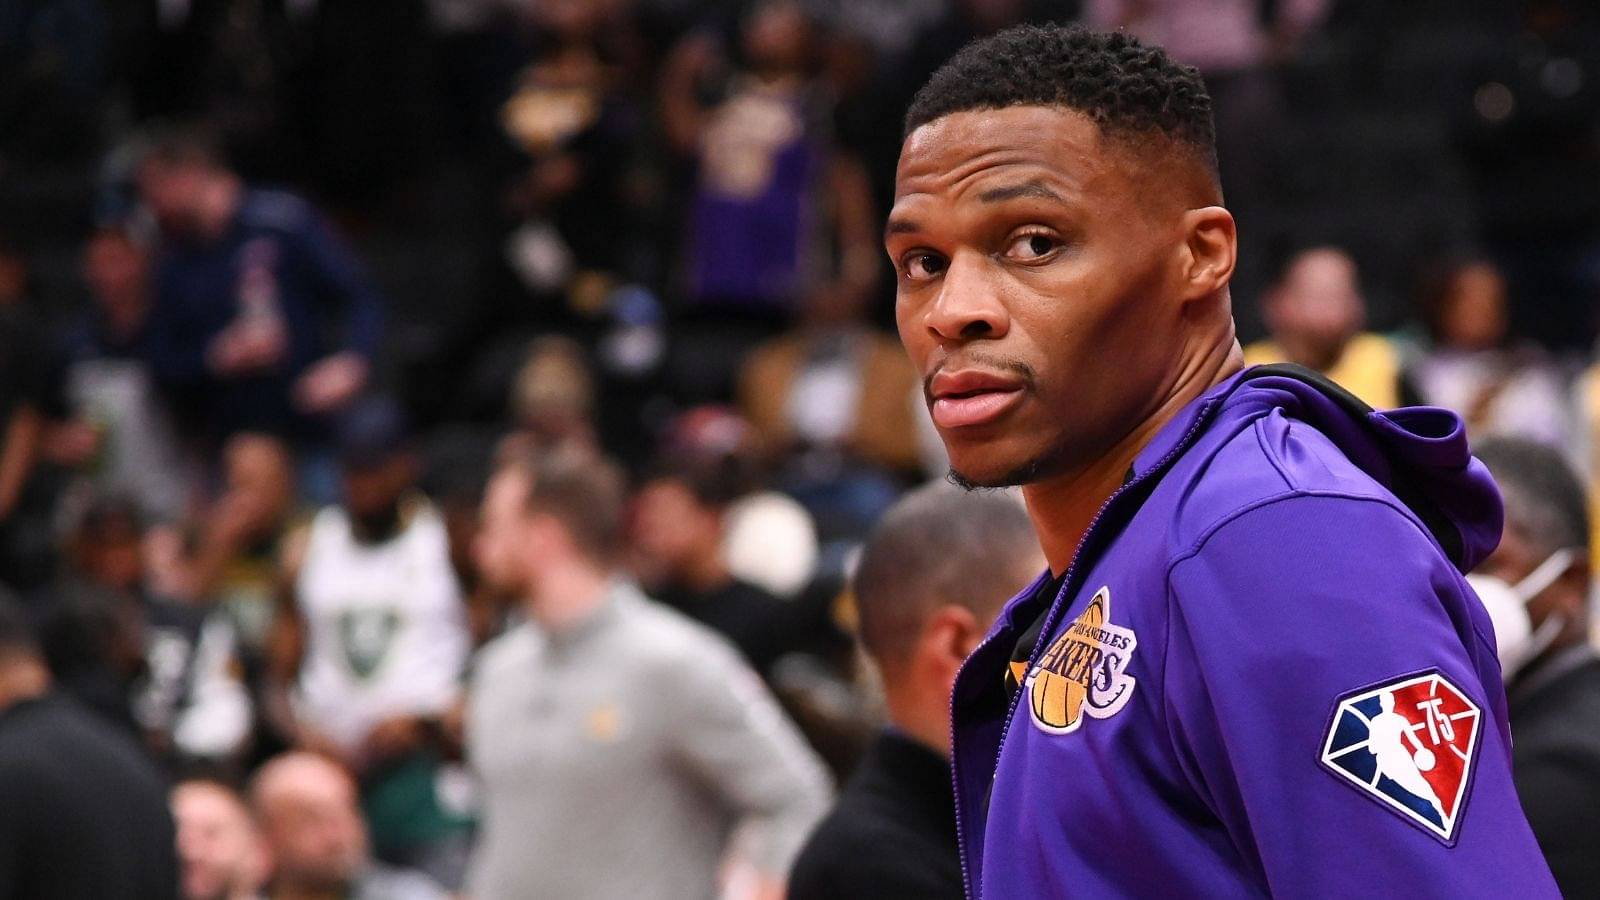 "It's amazing how defiant Russell Westbrook is!": Bill Simmons questions Lakers point guard's self-awareness as he got hubristic after an amazing play against the Raptors